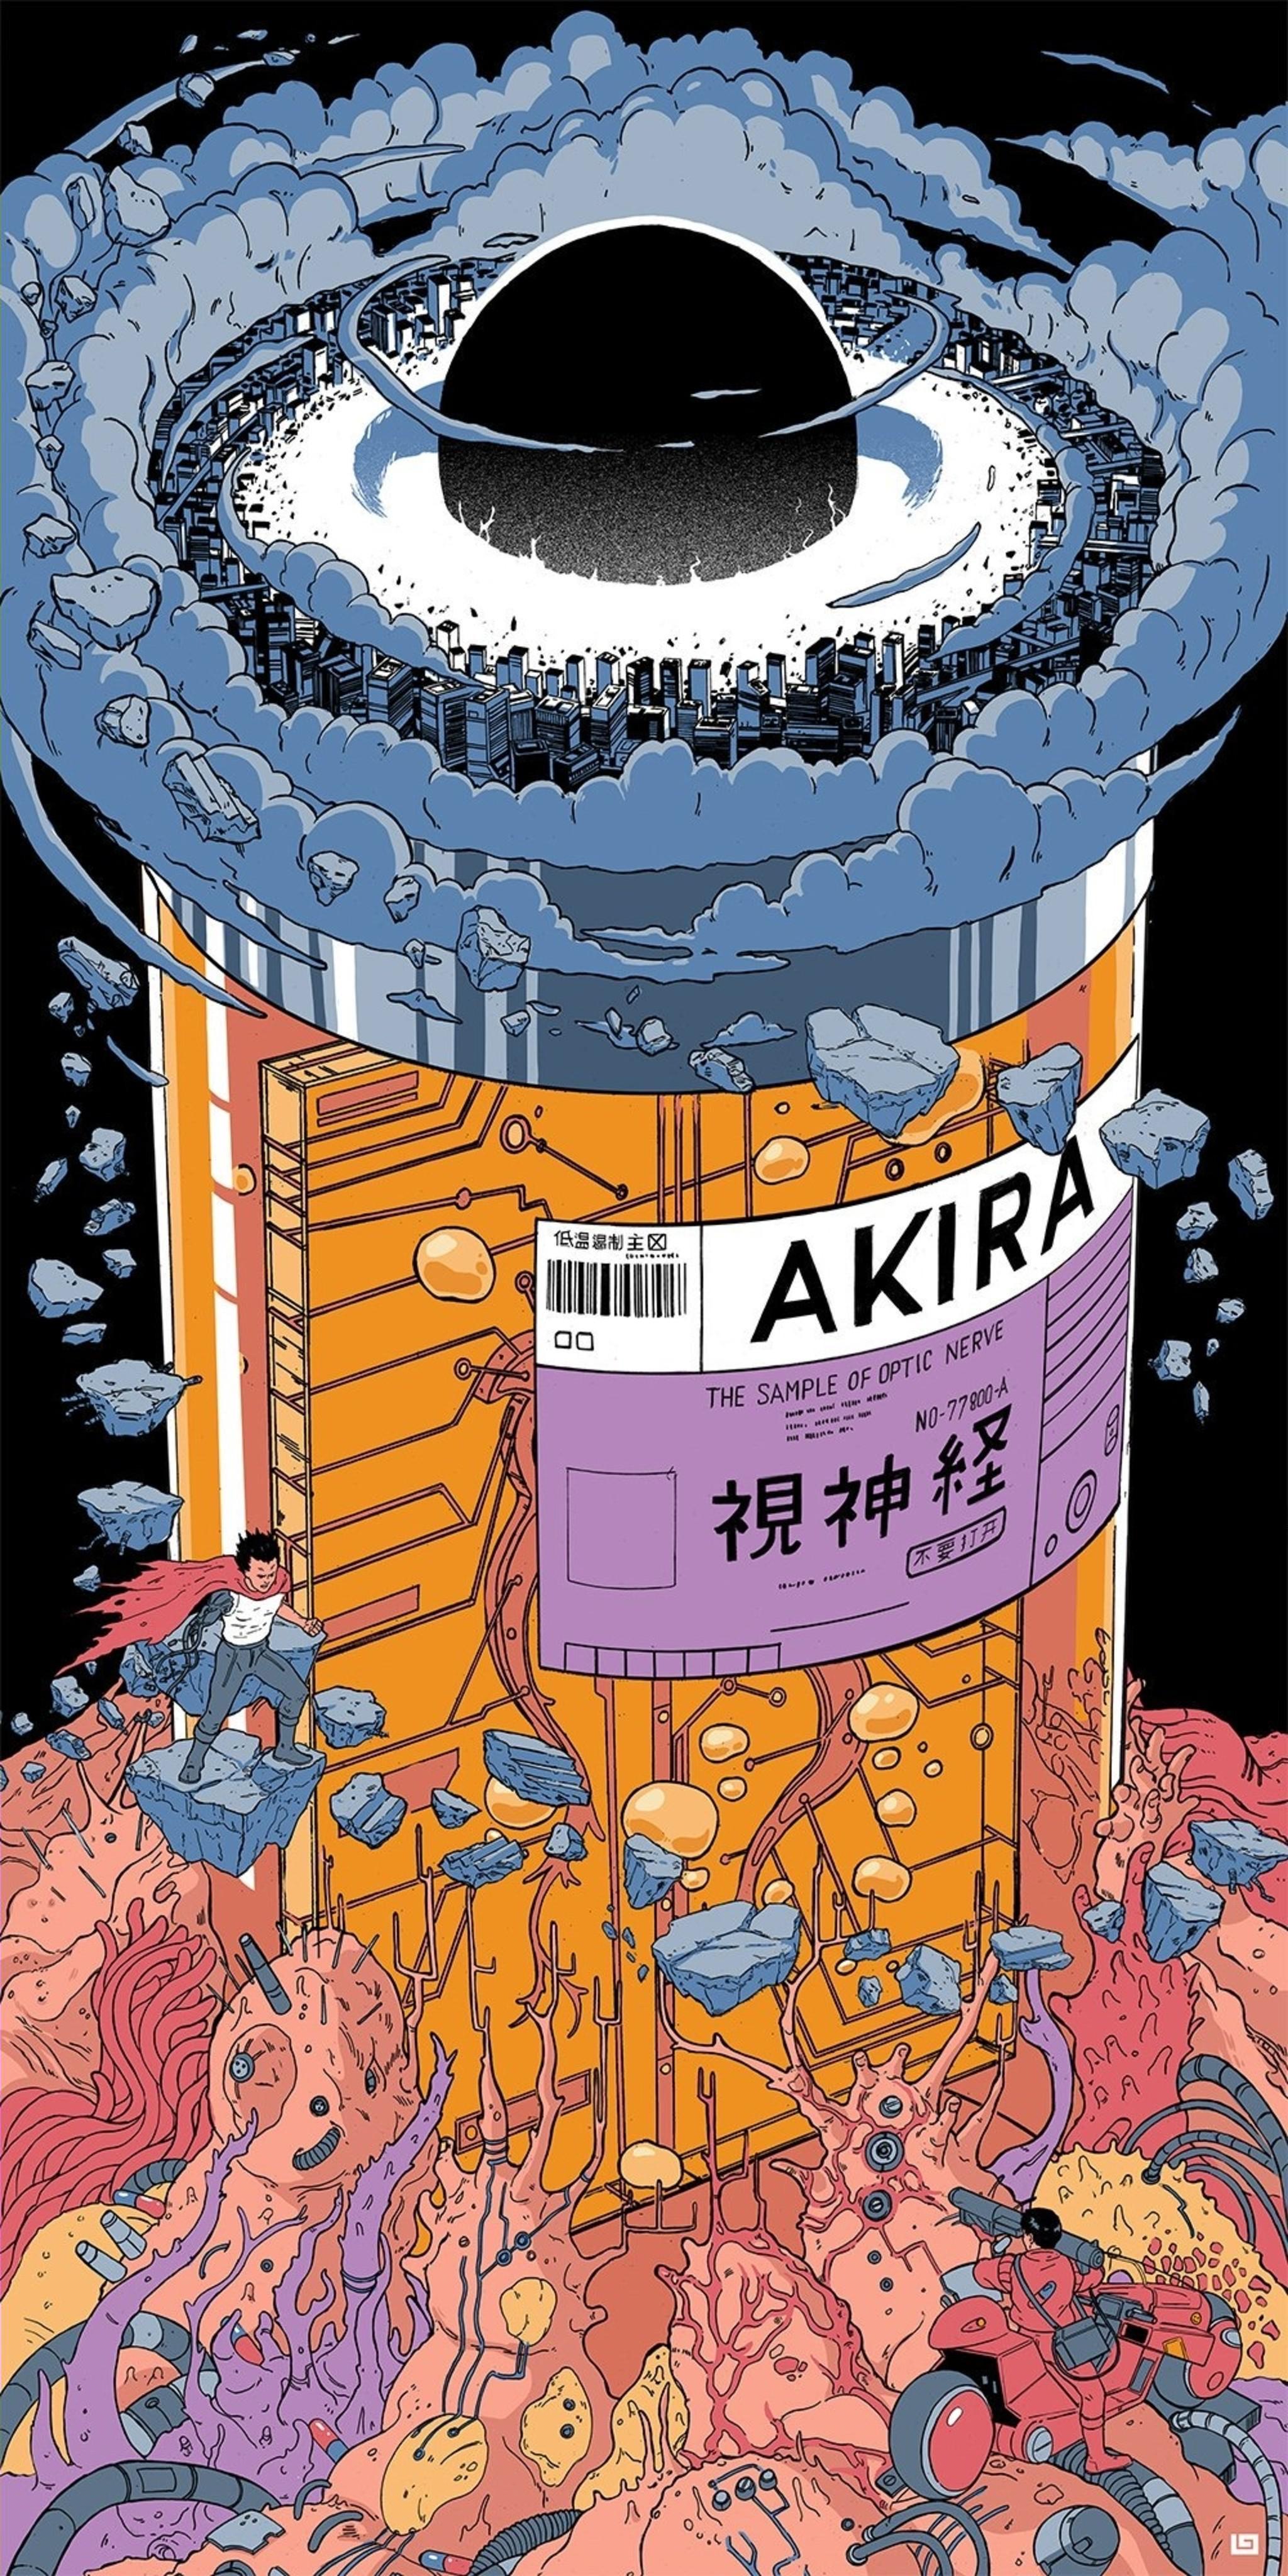 Details 71+ akira wallpapers best - in.cdgdbentre